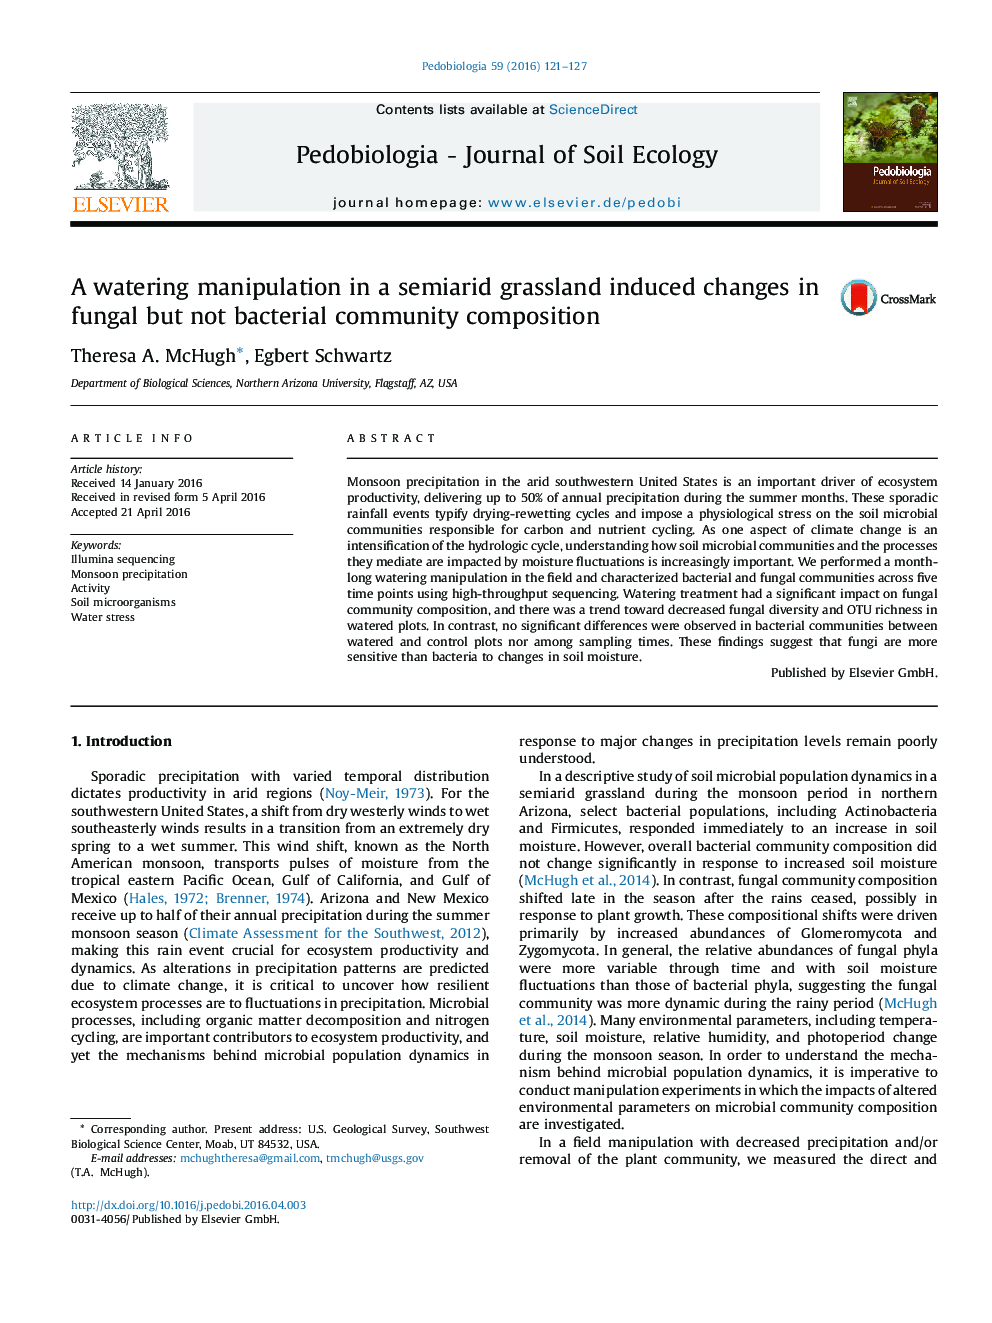 A watering manipulation in a semiarid grassland induced changes in fungal but not bacterial community composition